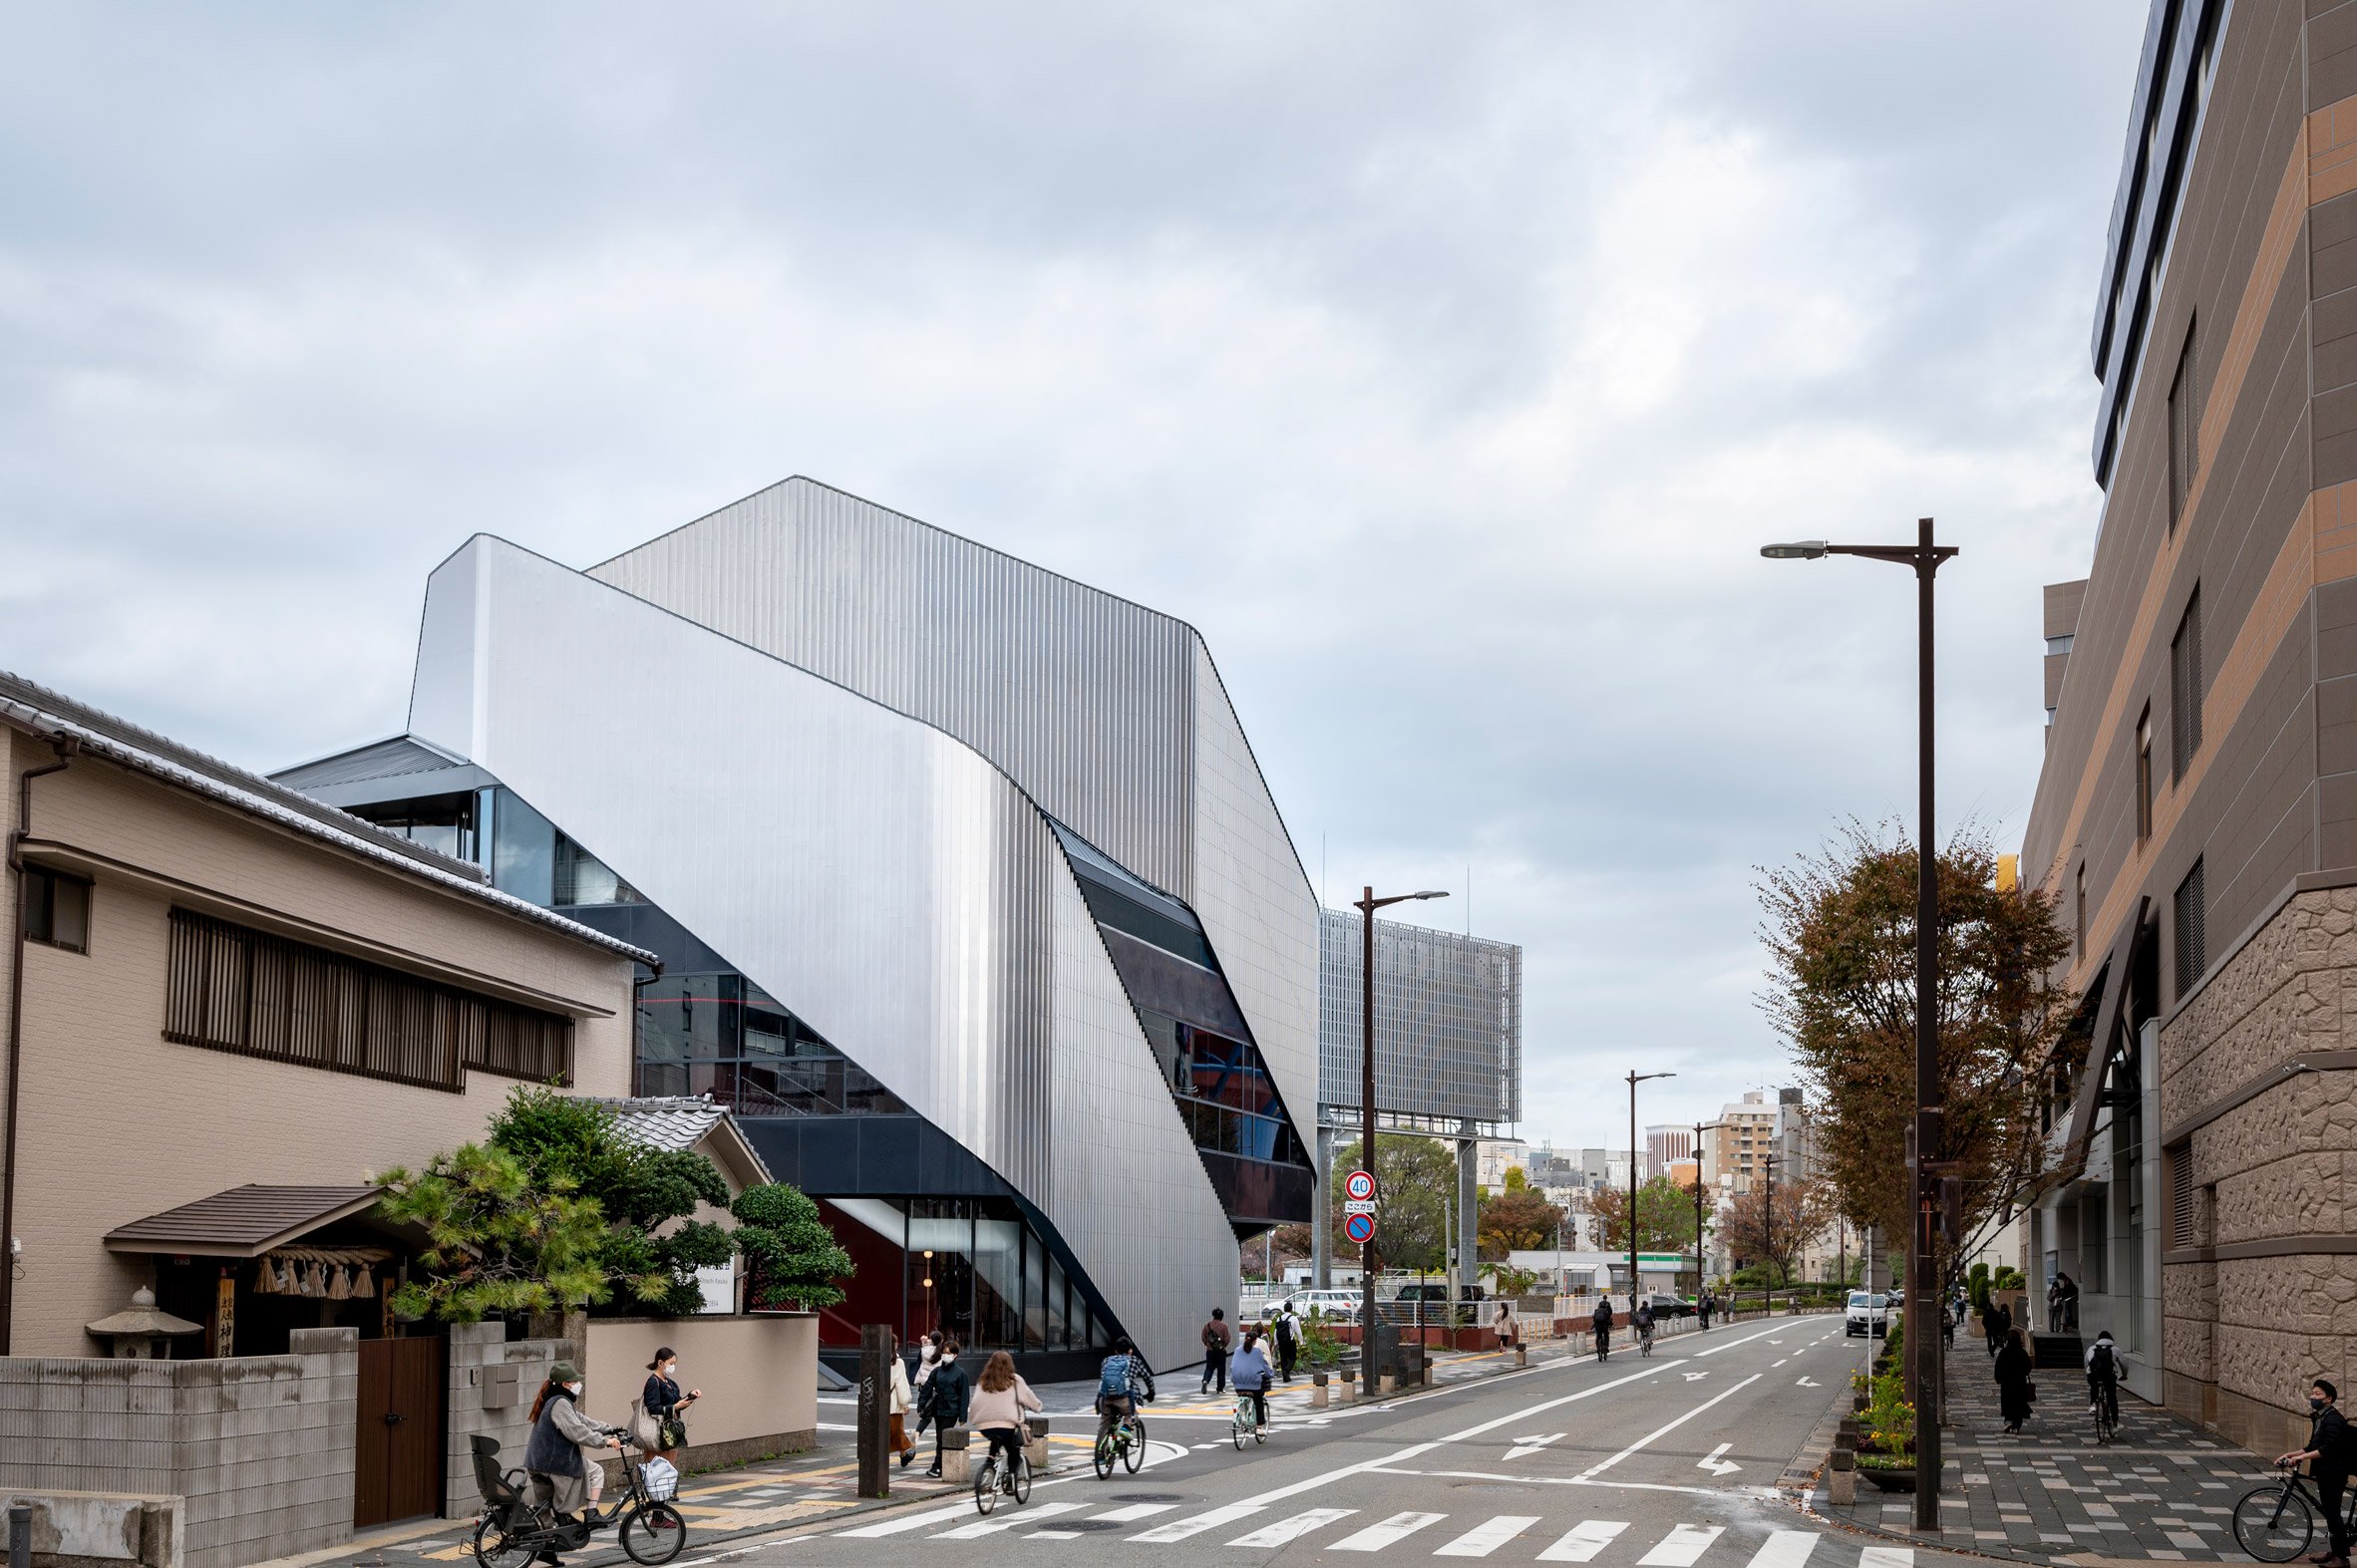 A theatre building on a city street with sweeping steel panels covering the exterior